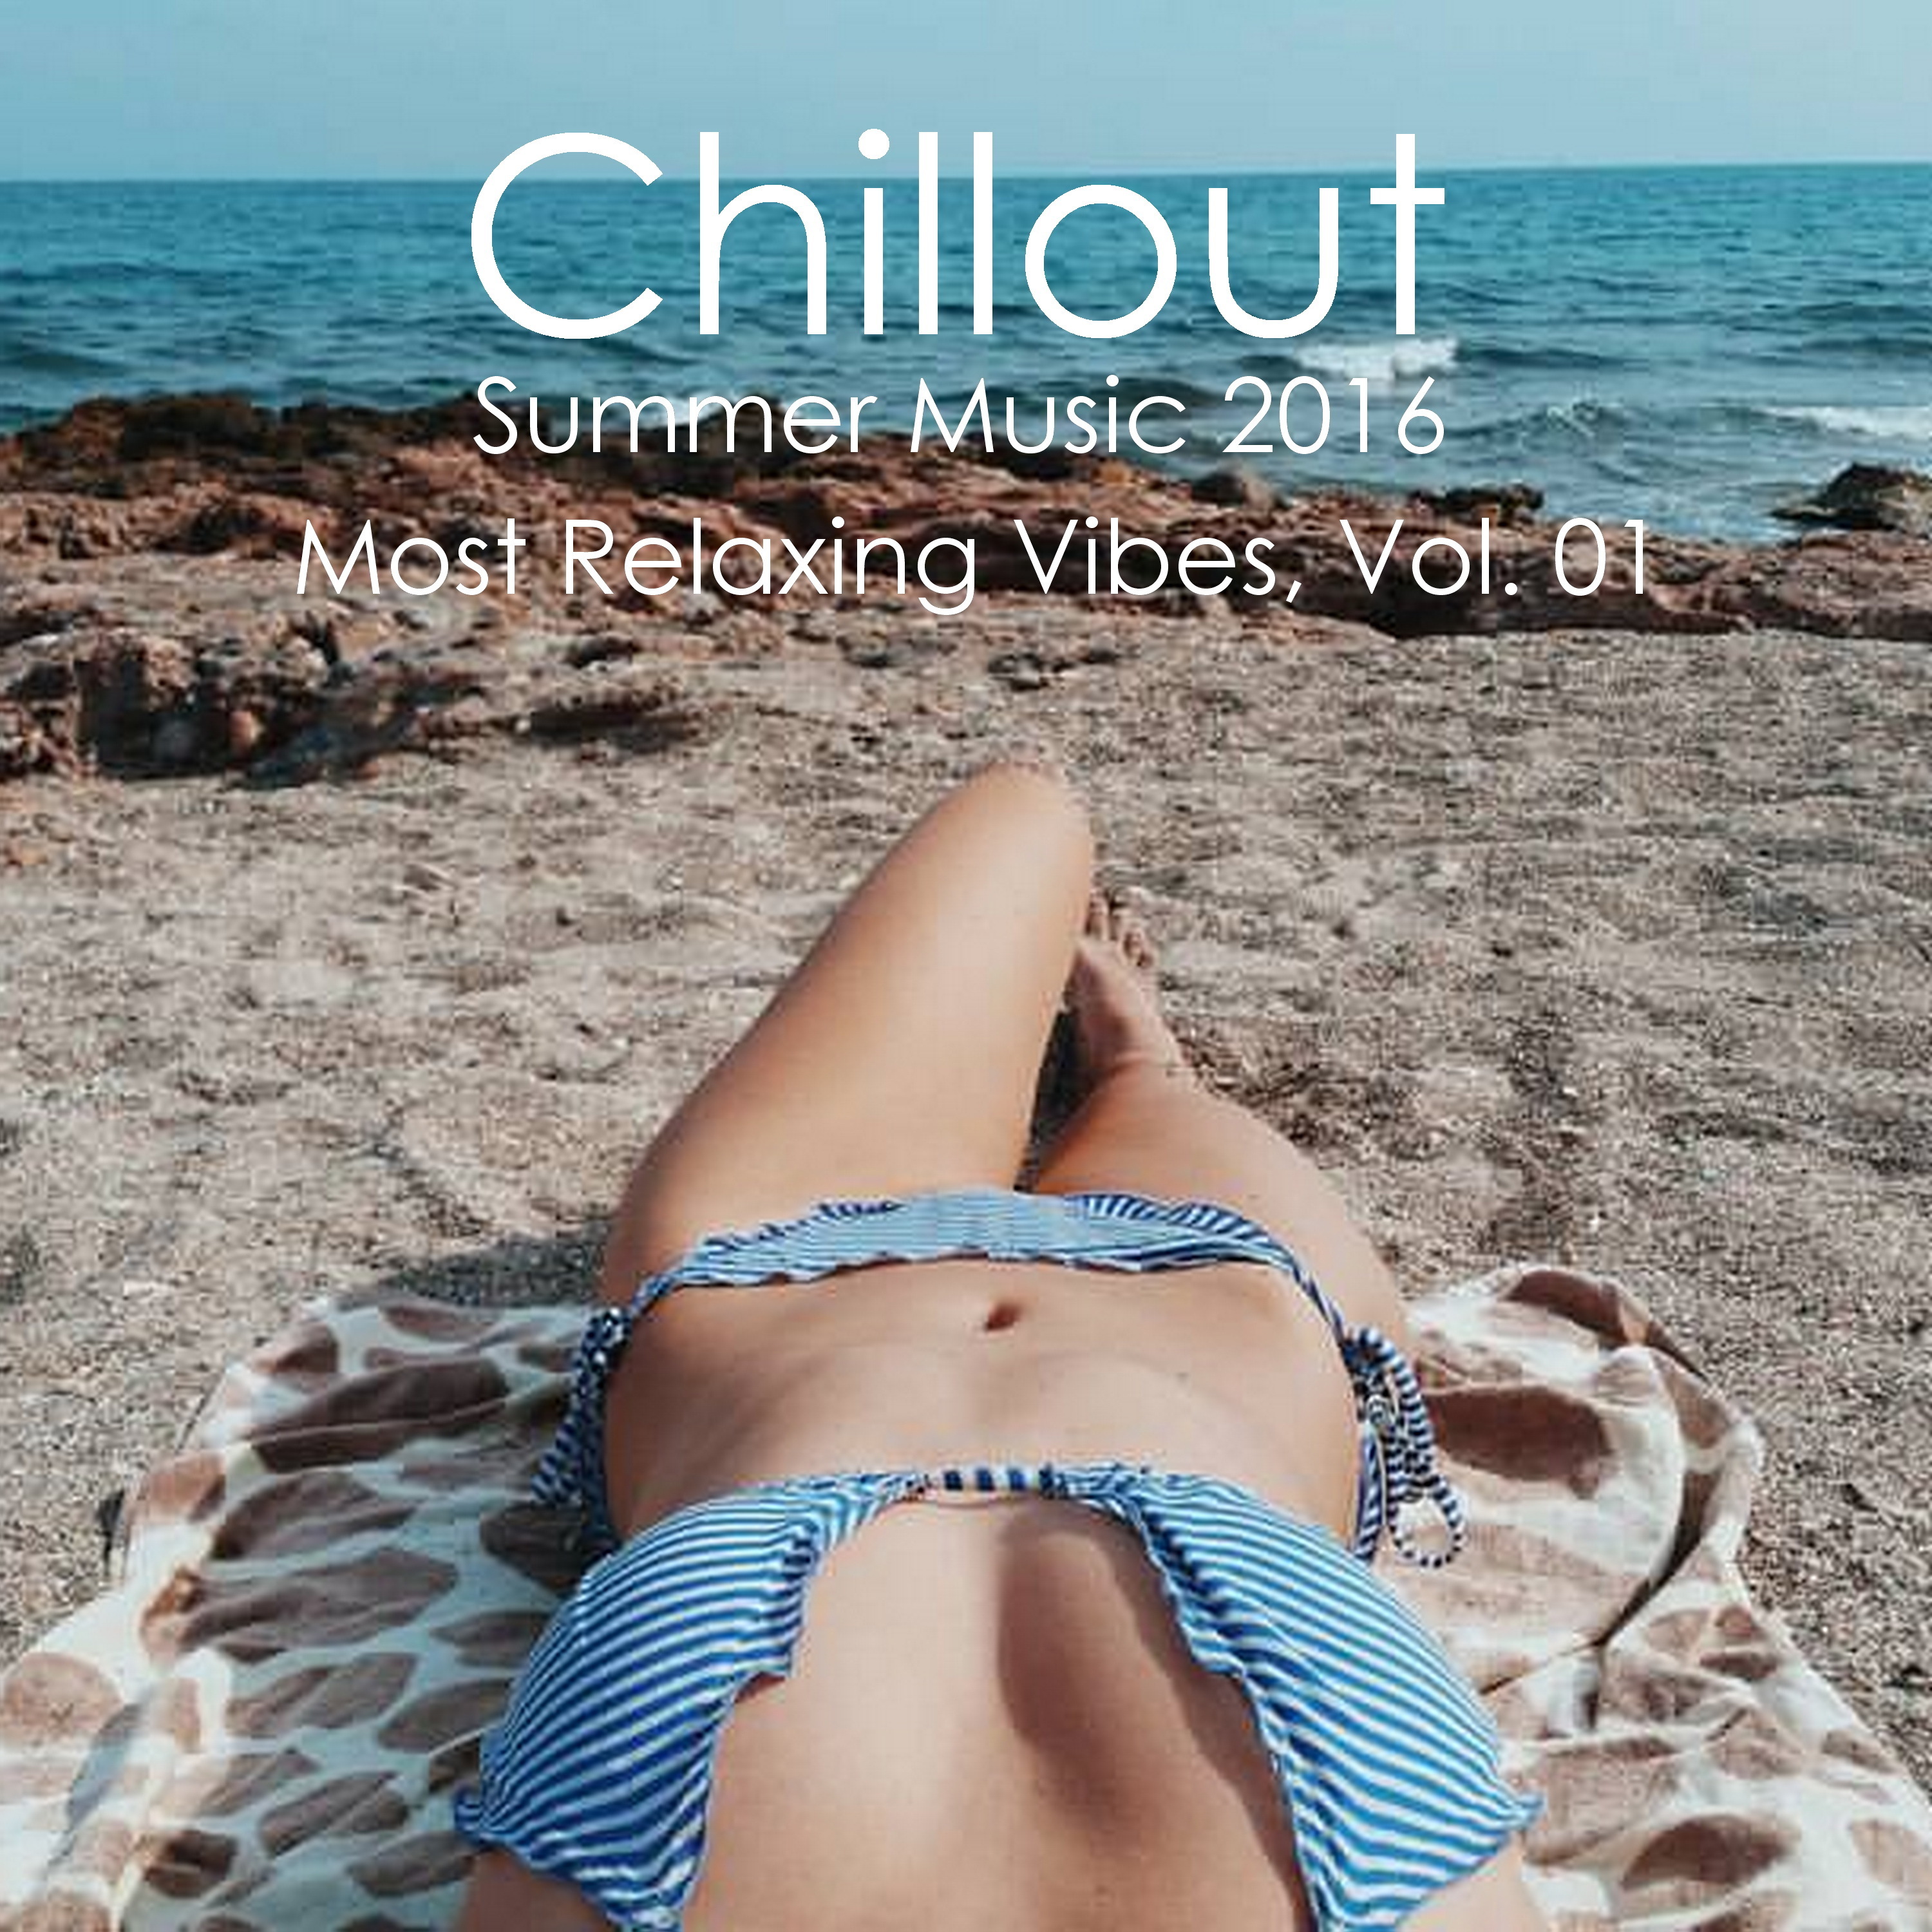 Chillout Summer Music 2016 - Most Relaxing Vibes, Vol. 01